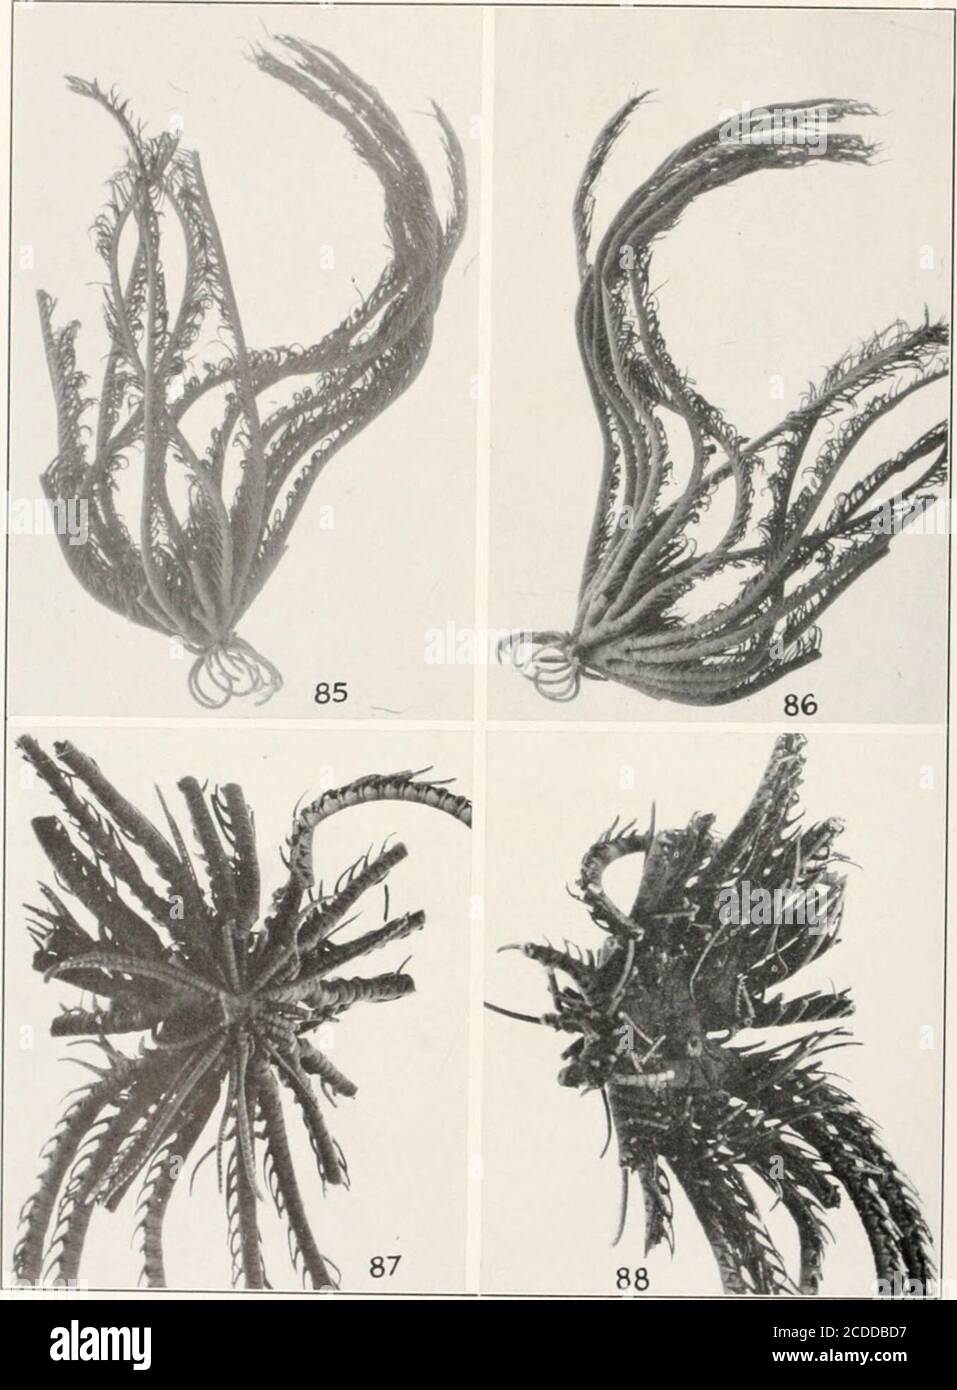 . Bulletin - United States National Museum . 82-84, Hettromelra savignii: 82, 83, Specimen From the Red Sea, 2 il .S.N.M nules of another specimen from the Red Sea, X 2 (U.S.N.M., ;; U. S NATIONAL MUSEUM BULLETIN 82. PART 4A PLATE 22. the R : B VI 10: (I .S.N.M., ;; U. S. NATIONAL MUSEUM BULLETIN 82. PART 4A PLATE 23 Stock Photo